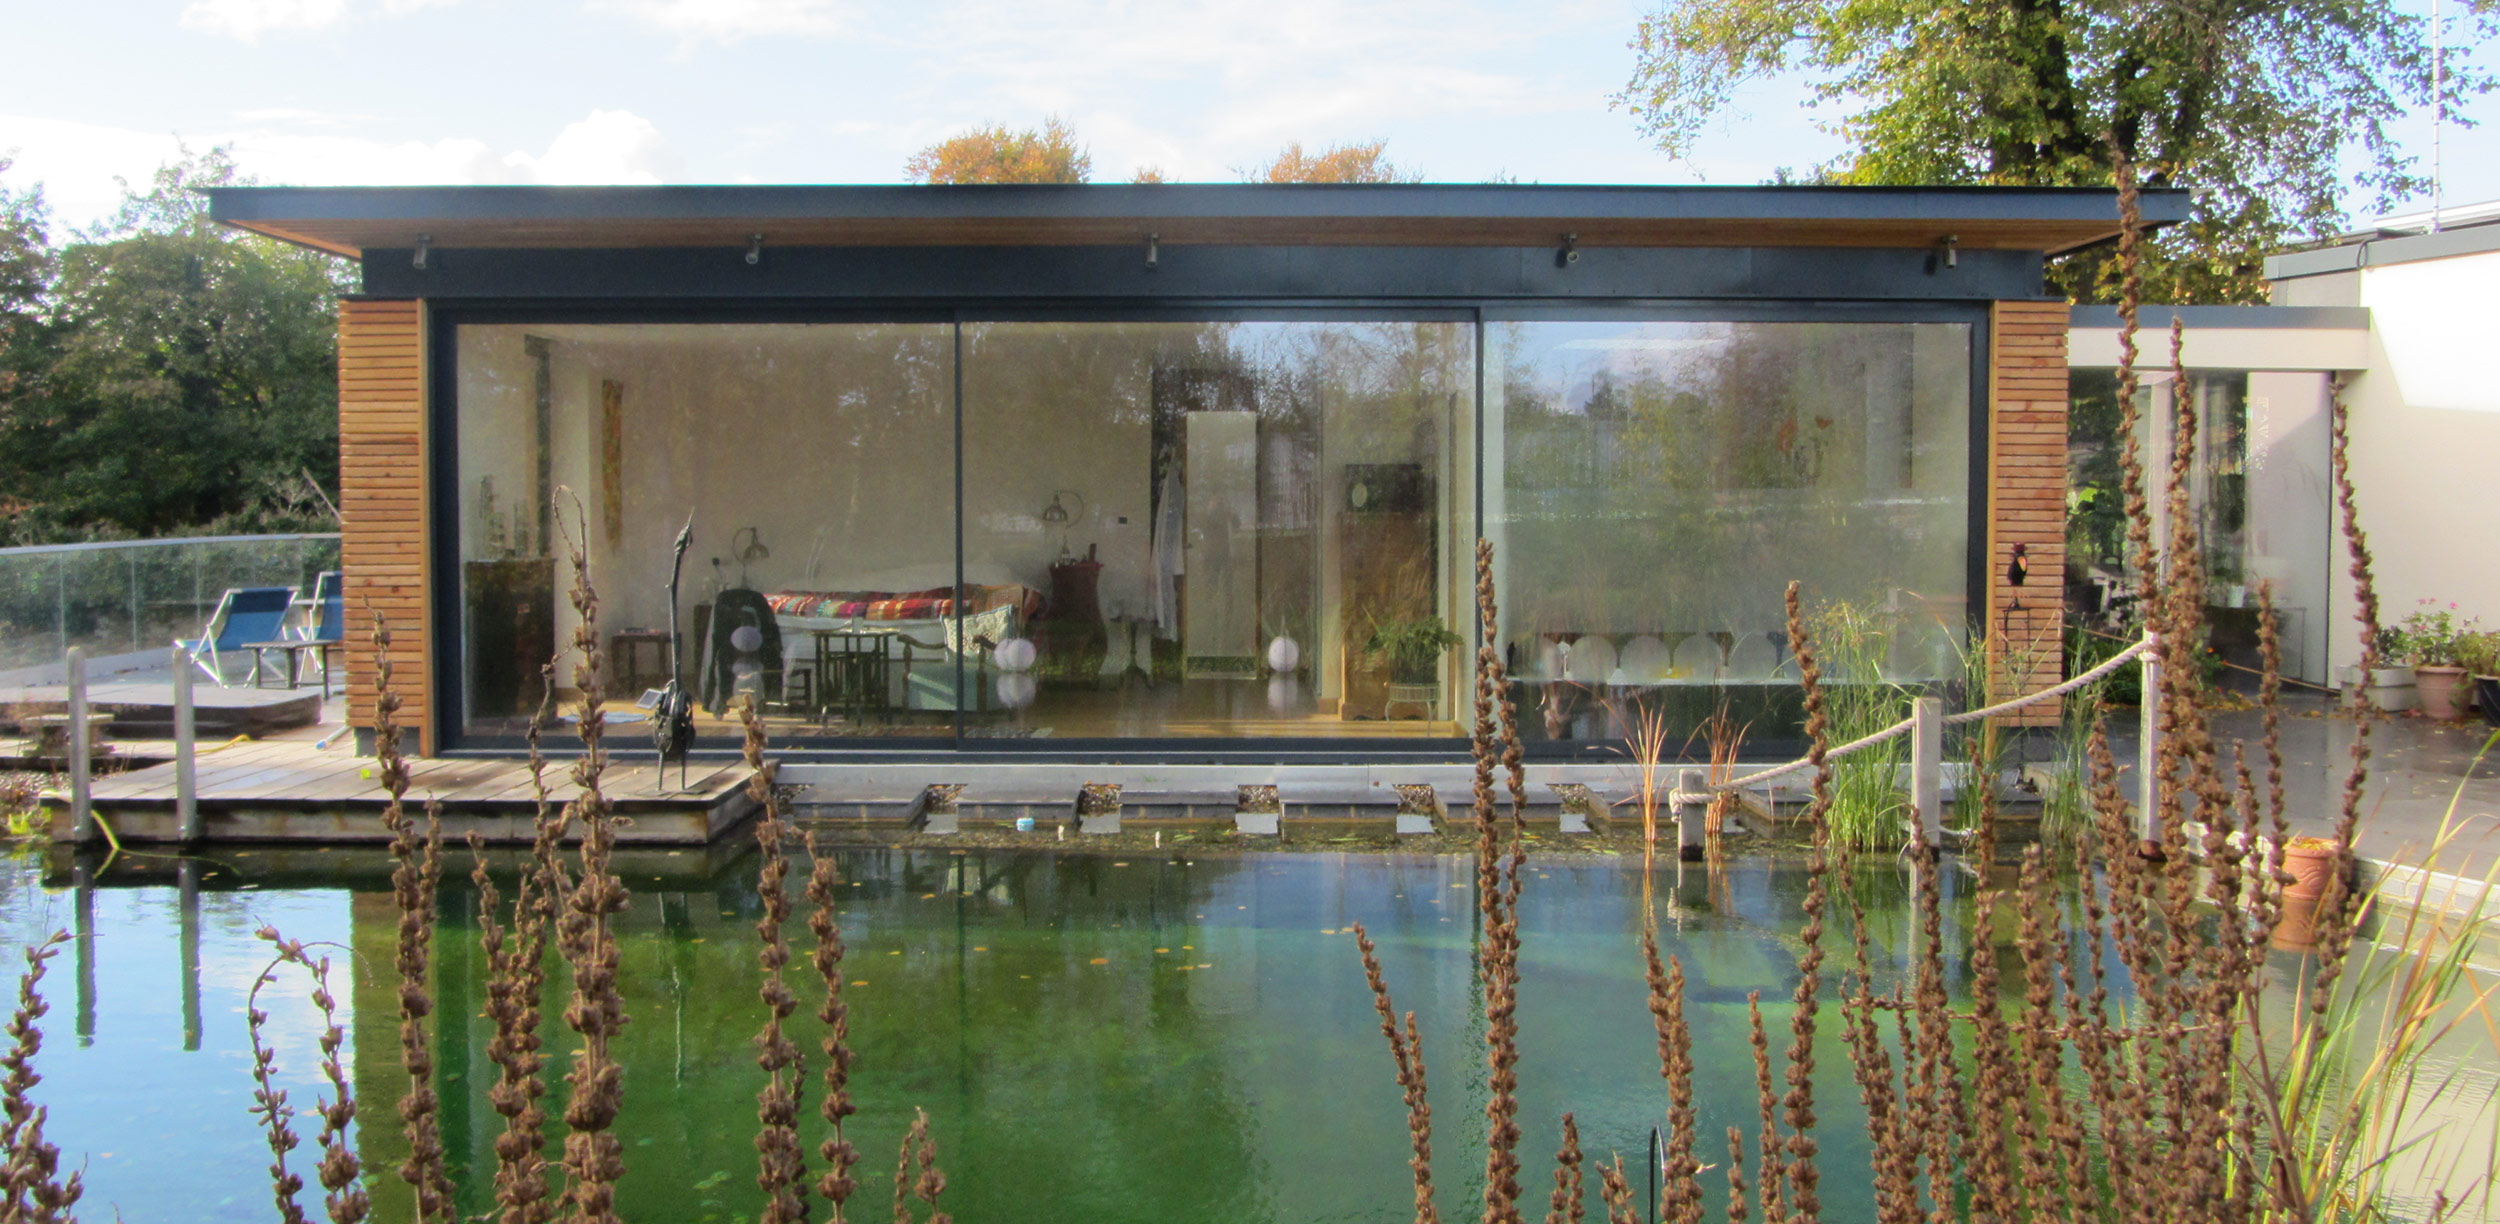 Bedroom block with larch cladding as viewed from across the natural swimming pond